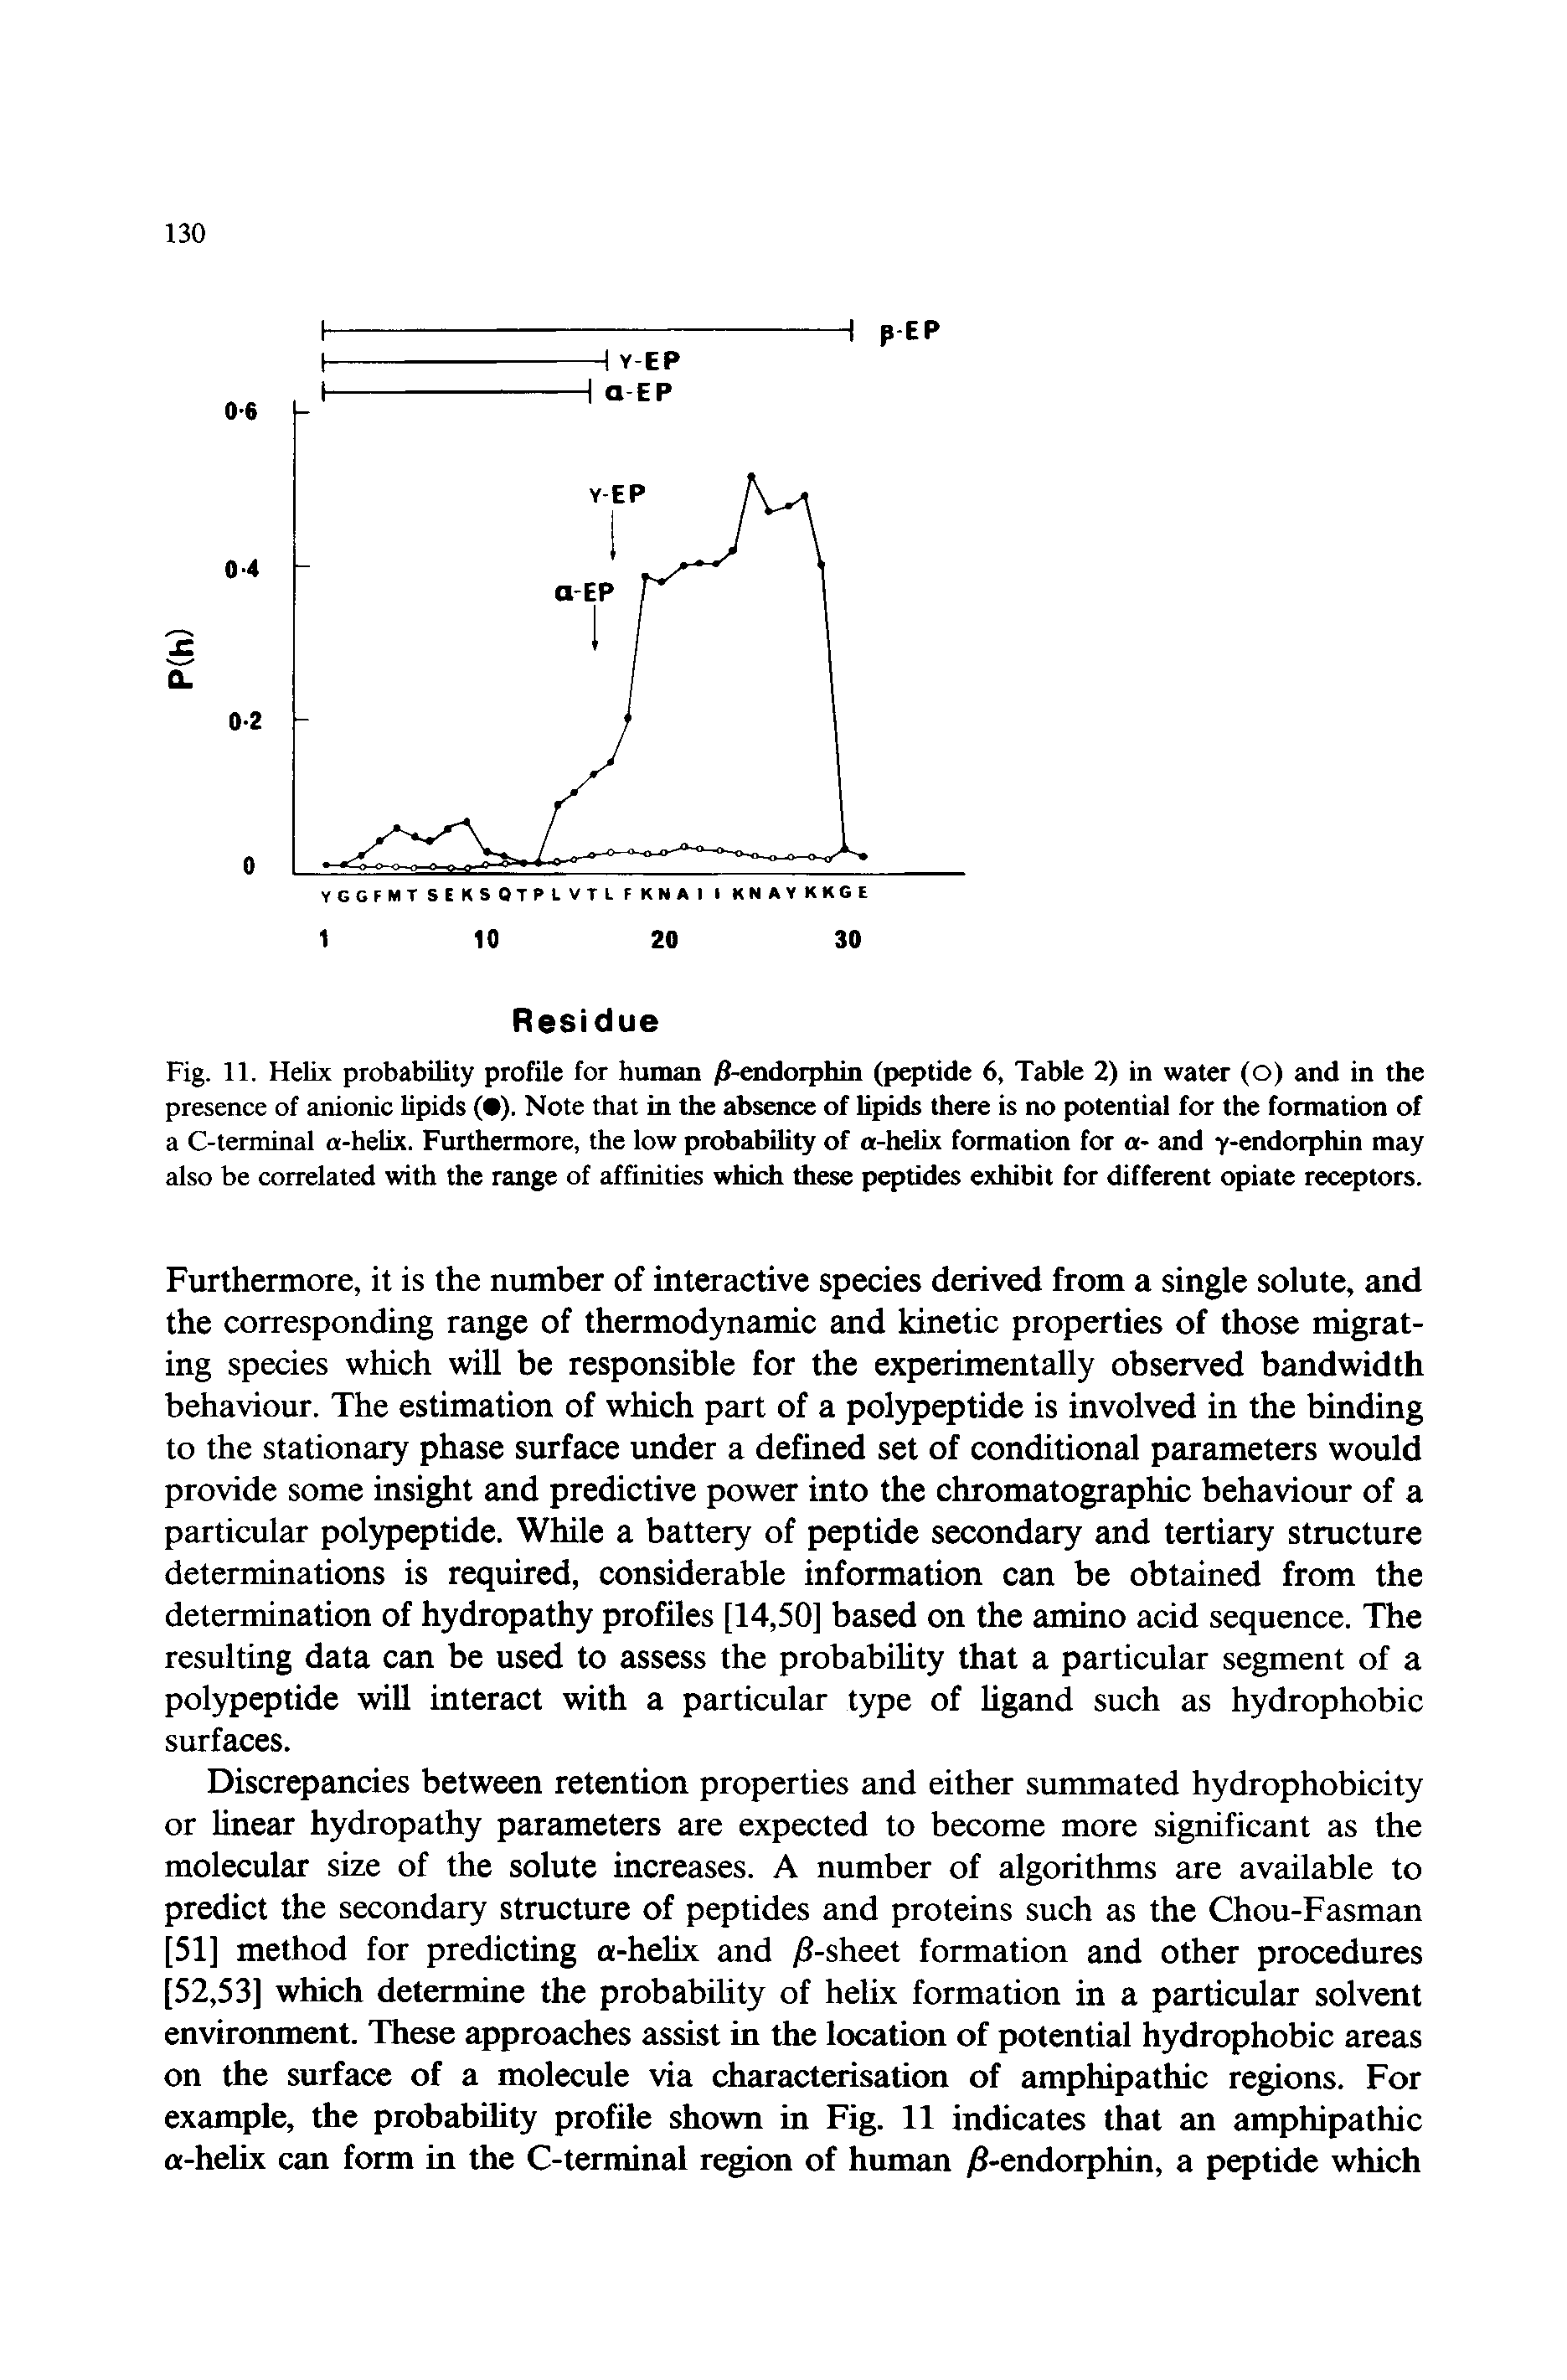 Fig. 11. Helix probability profile for human j8-endorphin (peptide 6, Table 2) in water (o) and in the presence of anionic lipids (e). Note that in the absence of lipids there is no potential for the formation of a C-terminal a-helix. Furthermore, the low probability of a-helix formation for a- and y-endorphin may also be correlated with the range of affinities which these peptides exhibit for different opiate receptors.